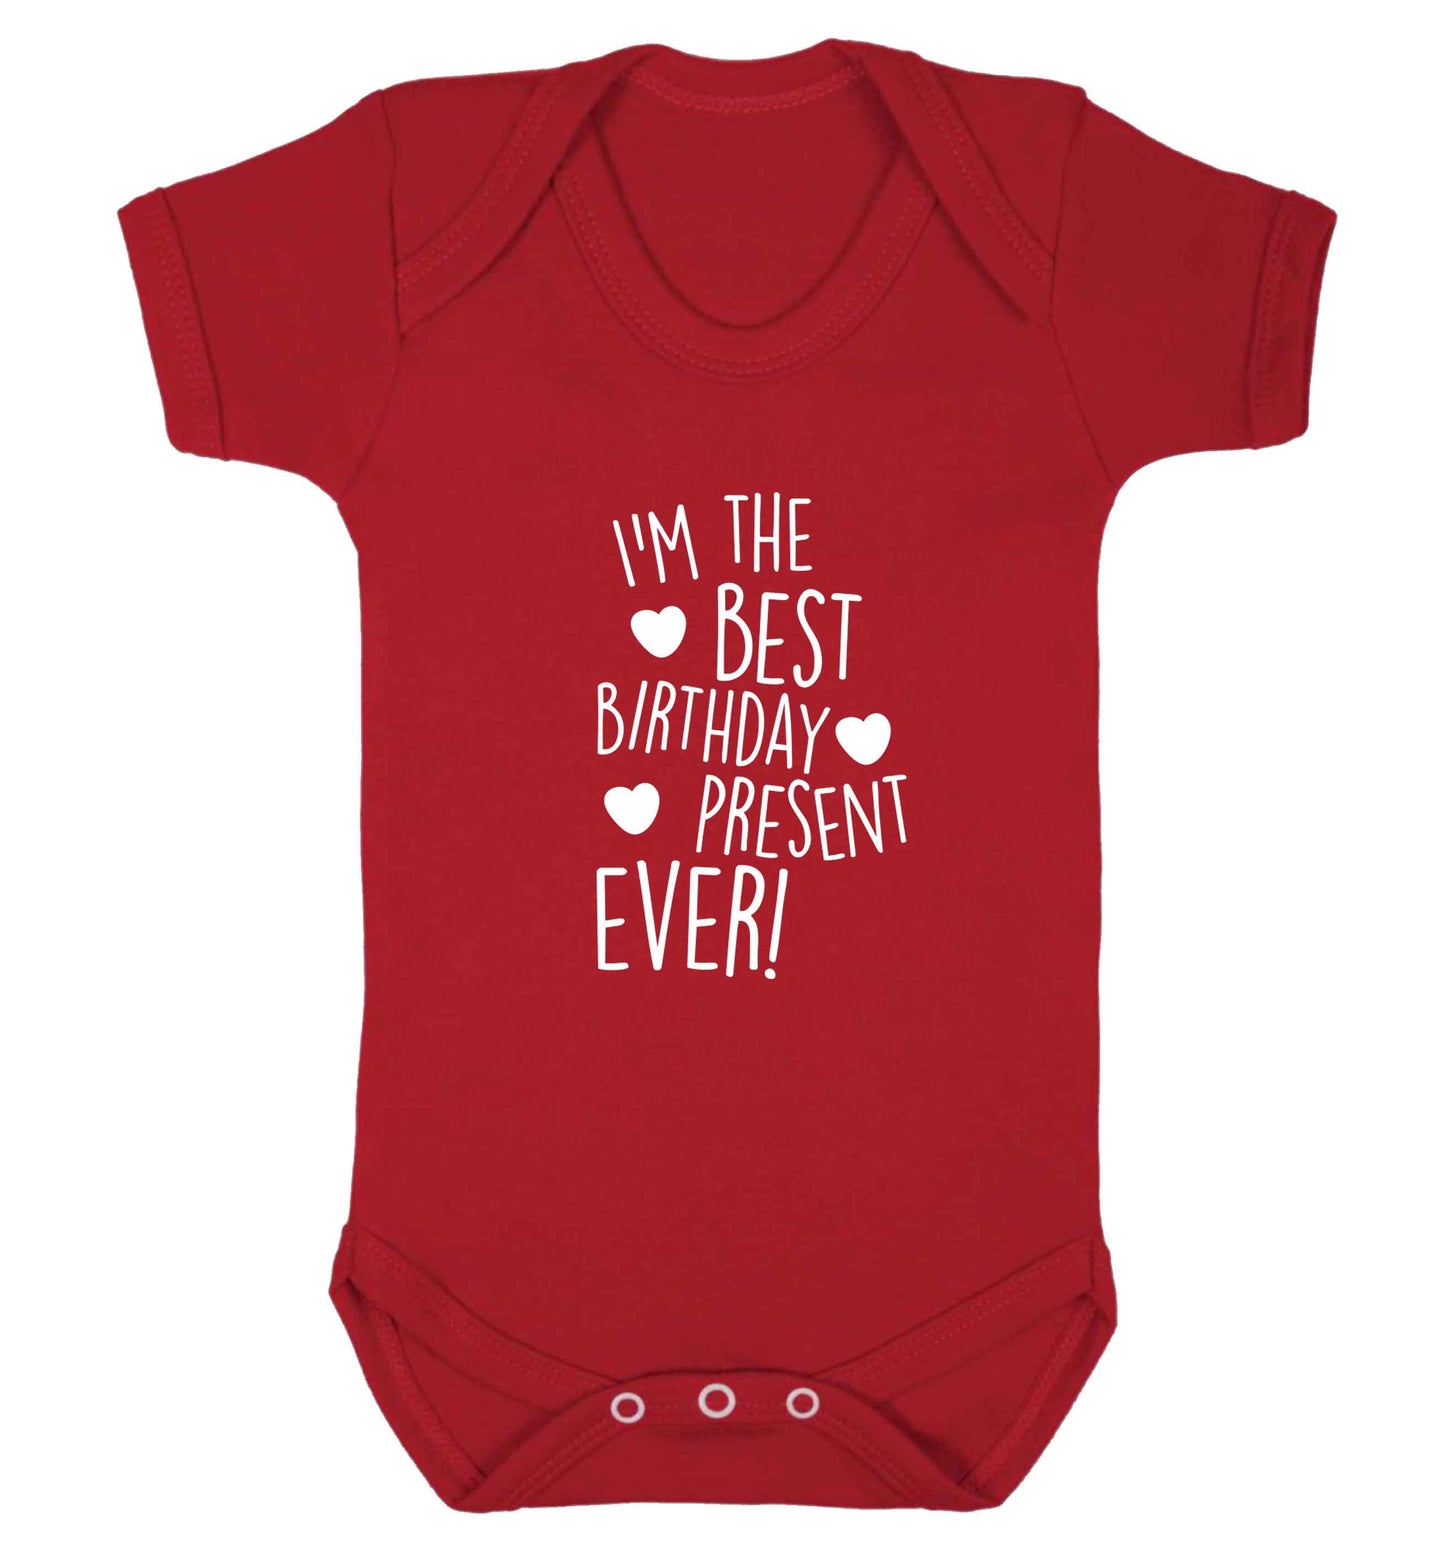 I'm the best birthday present ever baby vest red 18-24 months